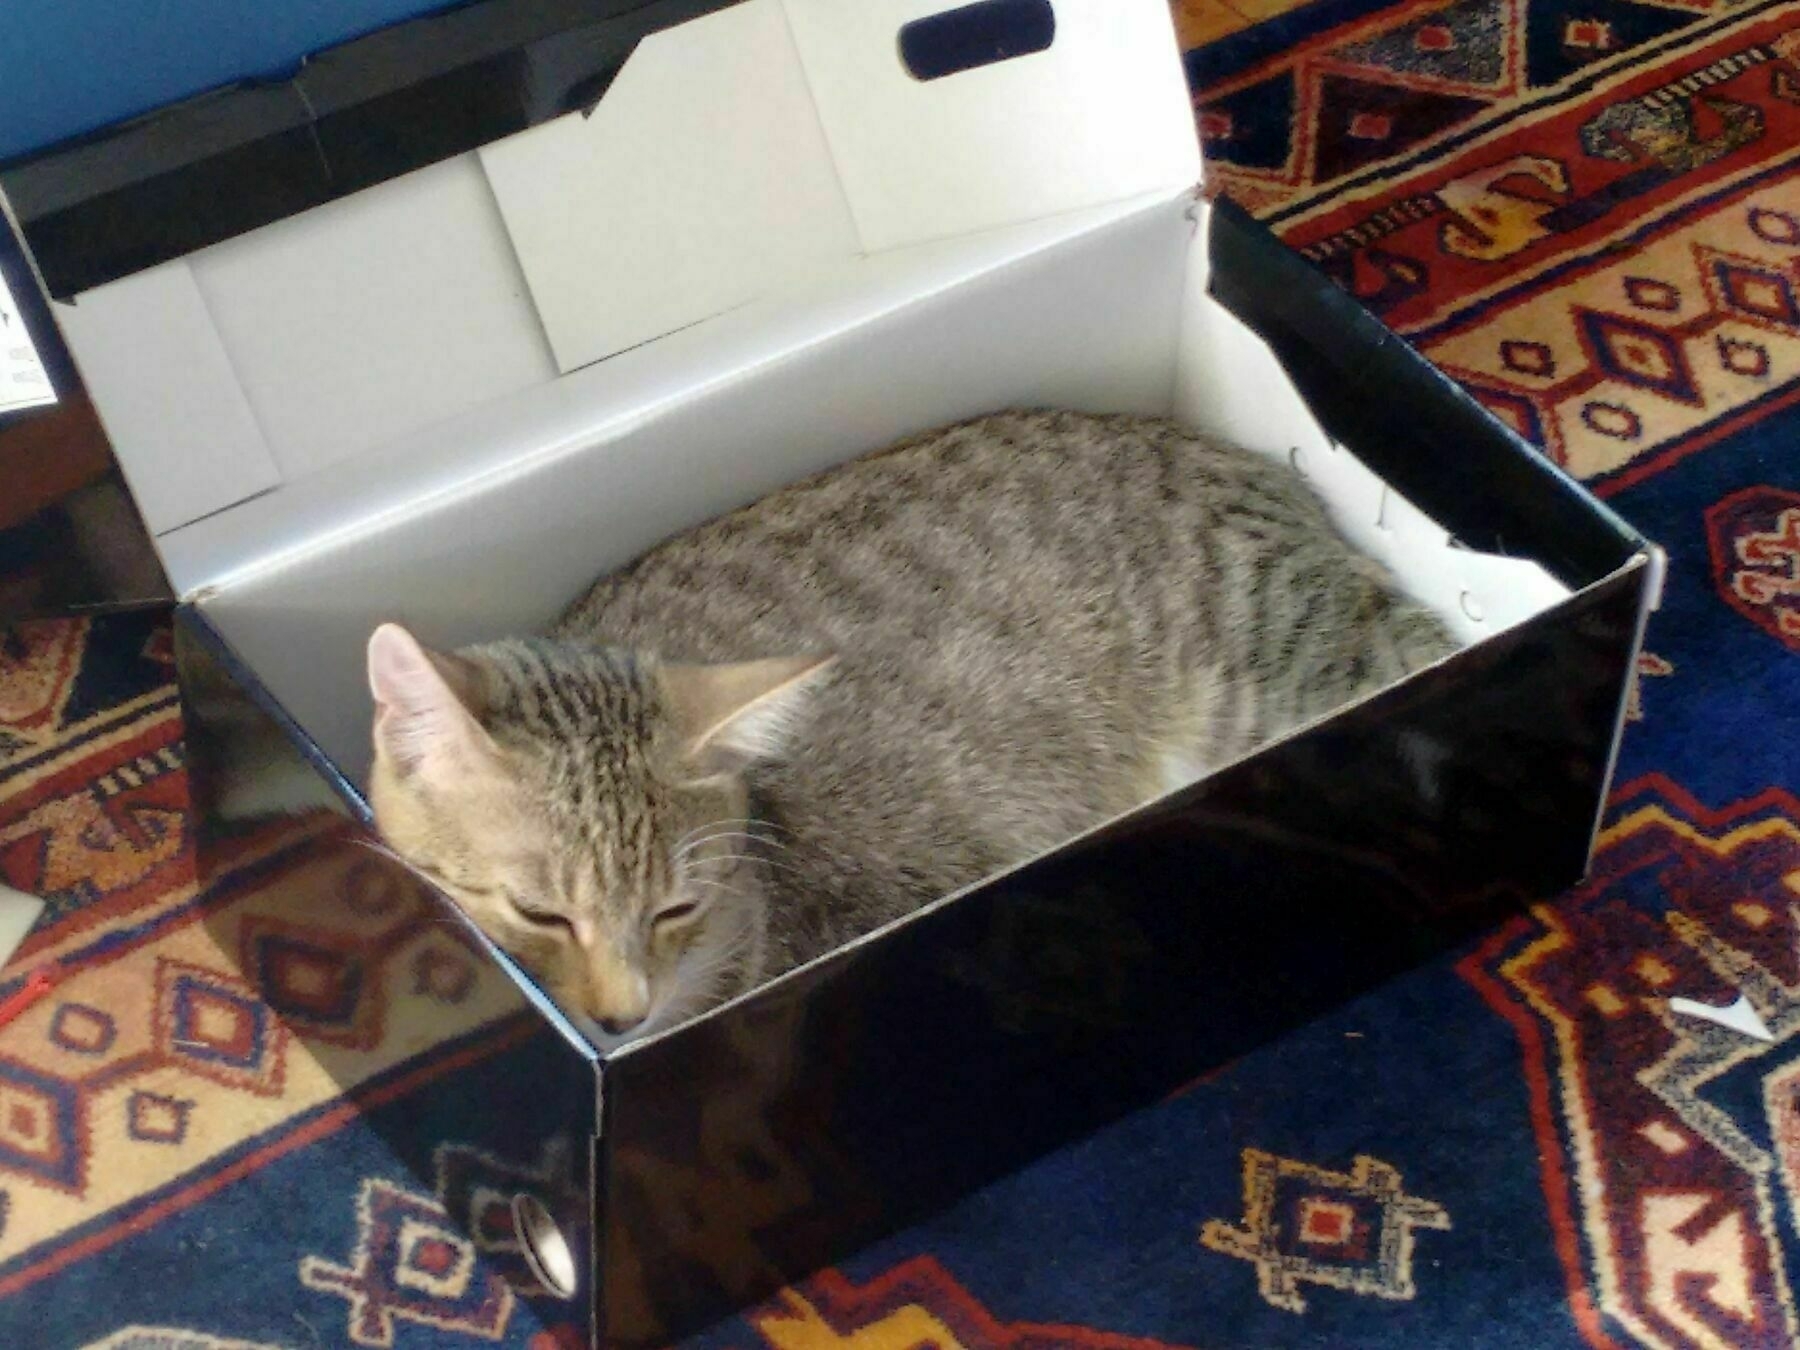 A tabby cat securely curled up in a shoe box, placed on a patterned rug.